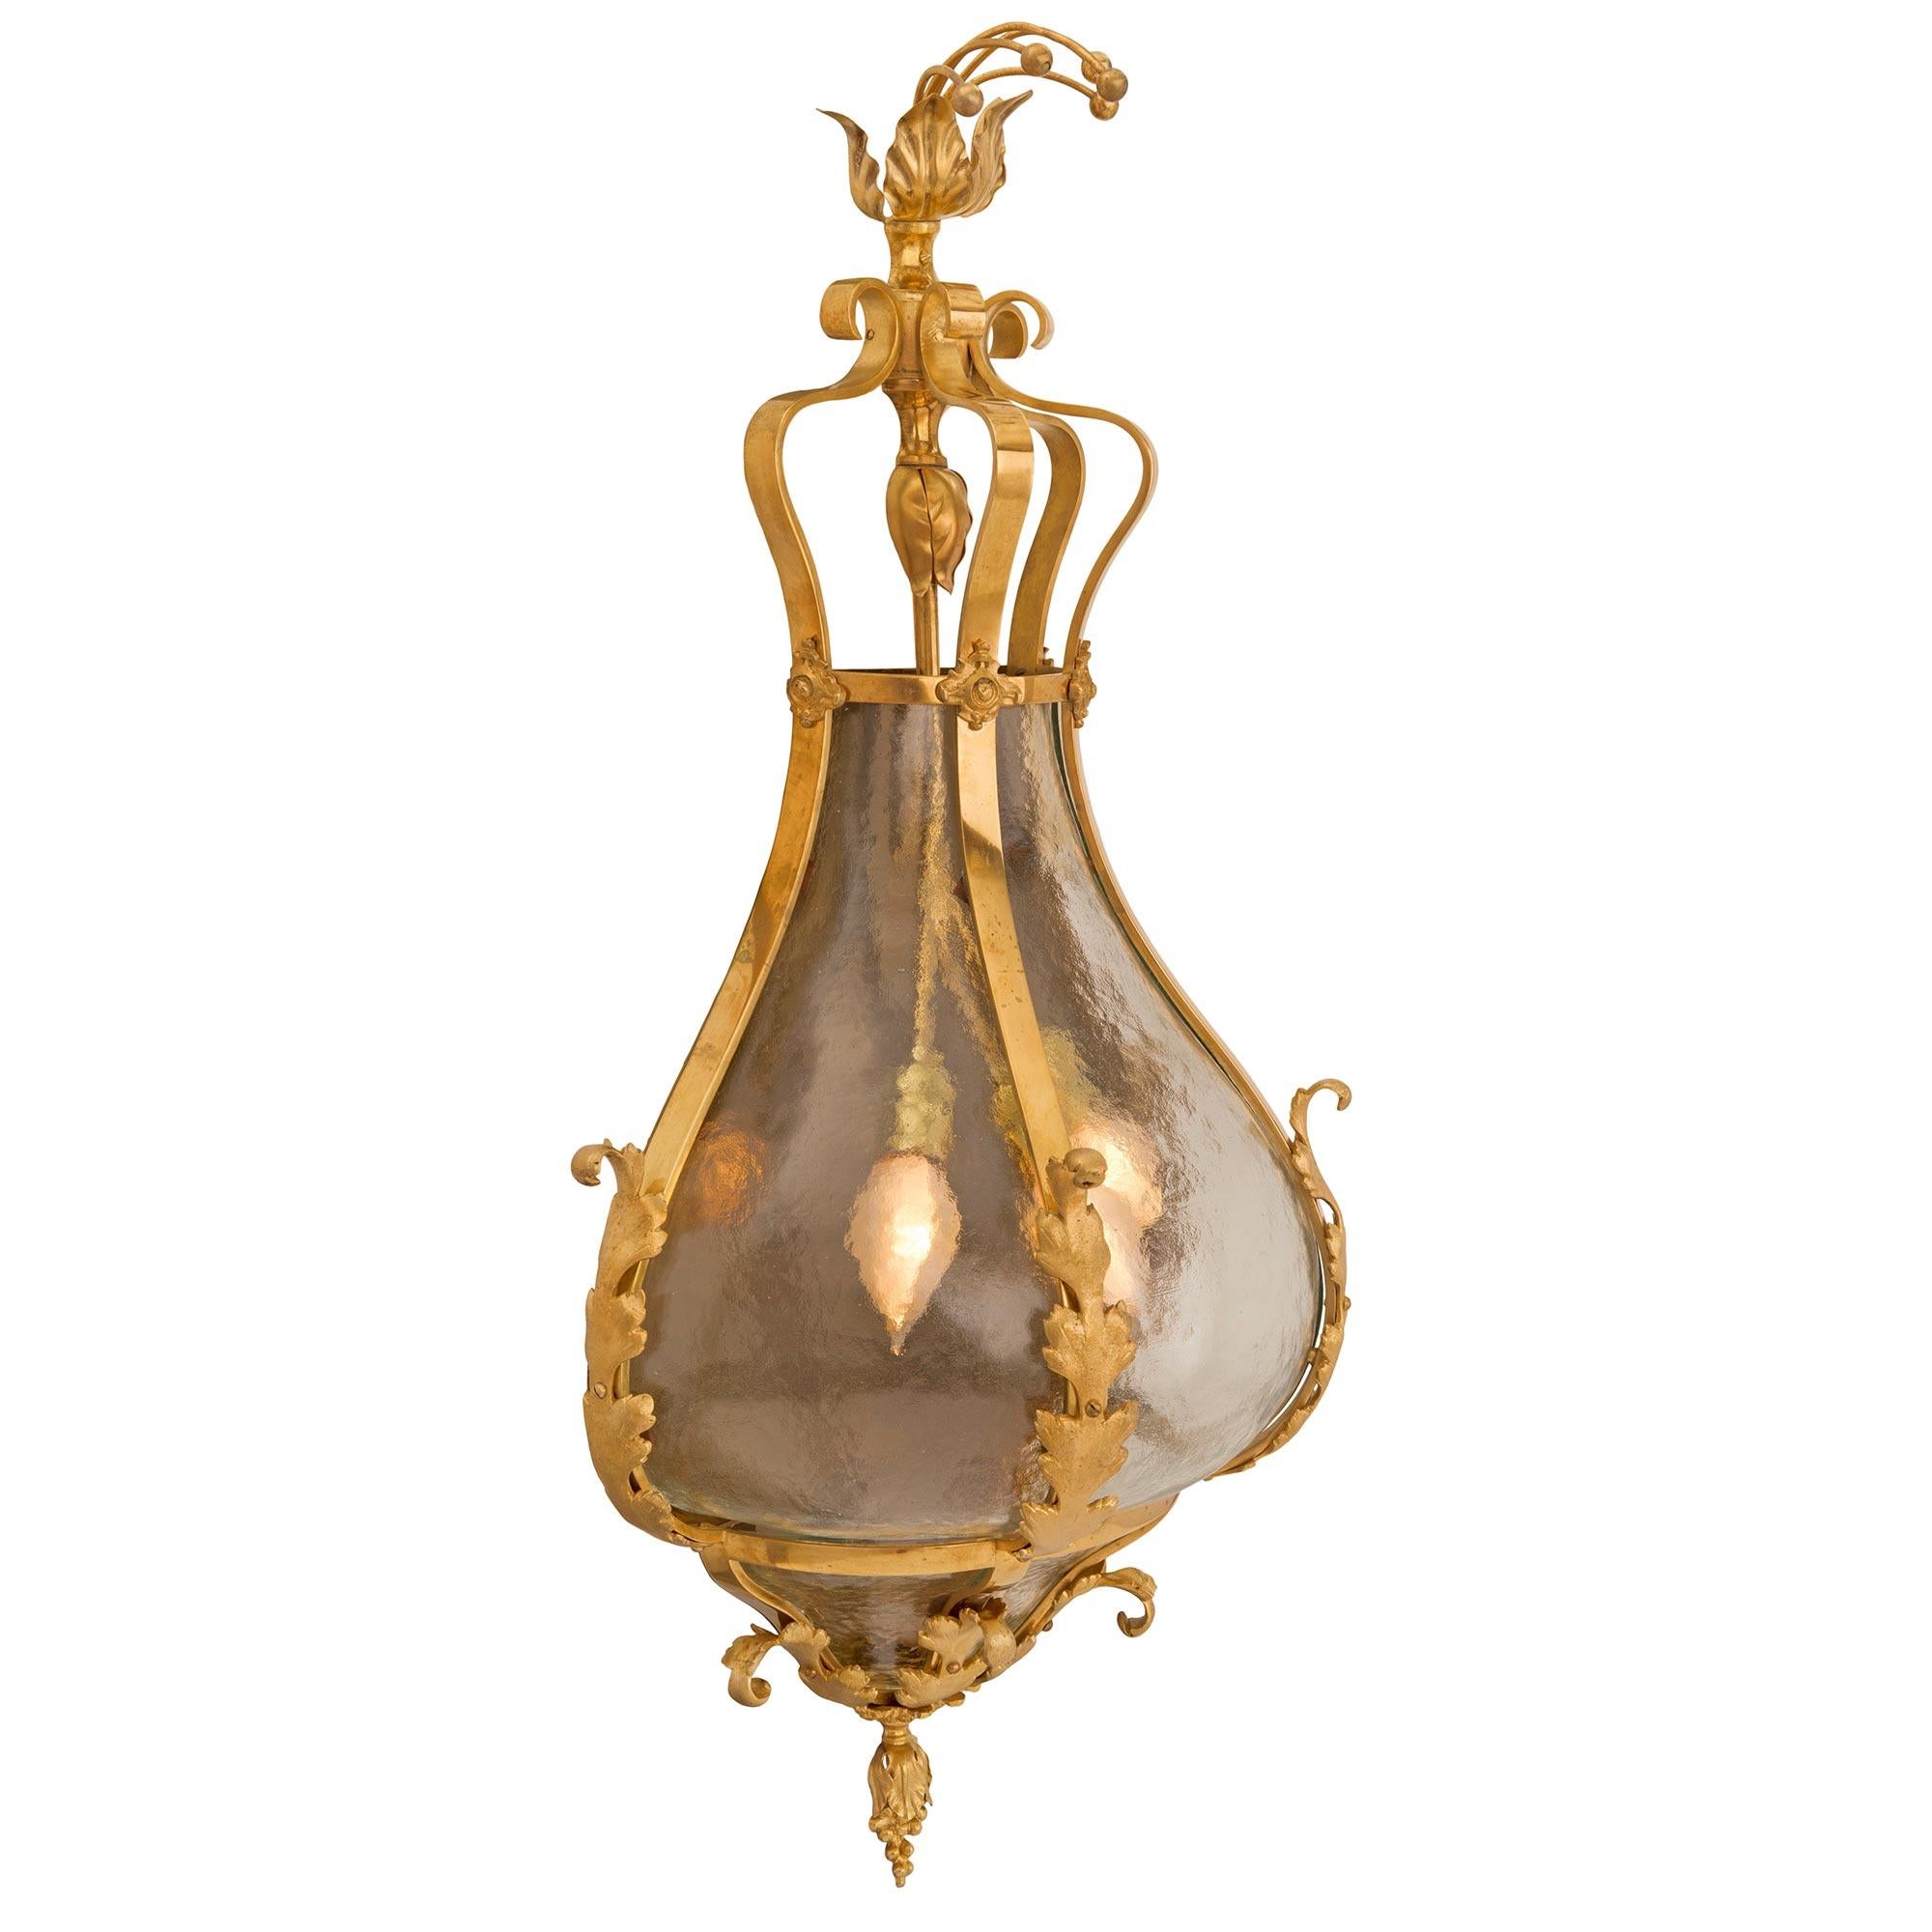 A beautiful and most unique Continental turn of the century ormolu and frosted glass sconce. The sconce is centered by a finely chased bottom foliate finial with charming leaves leading upwards. The original hand-blown frosted glass displays a